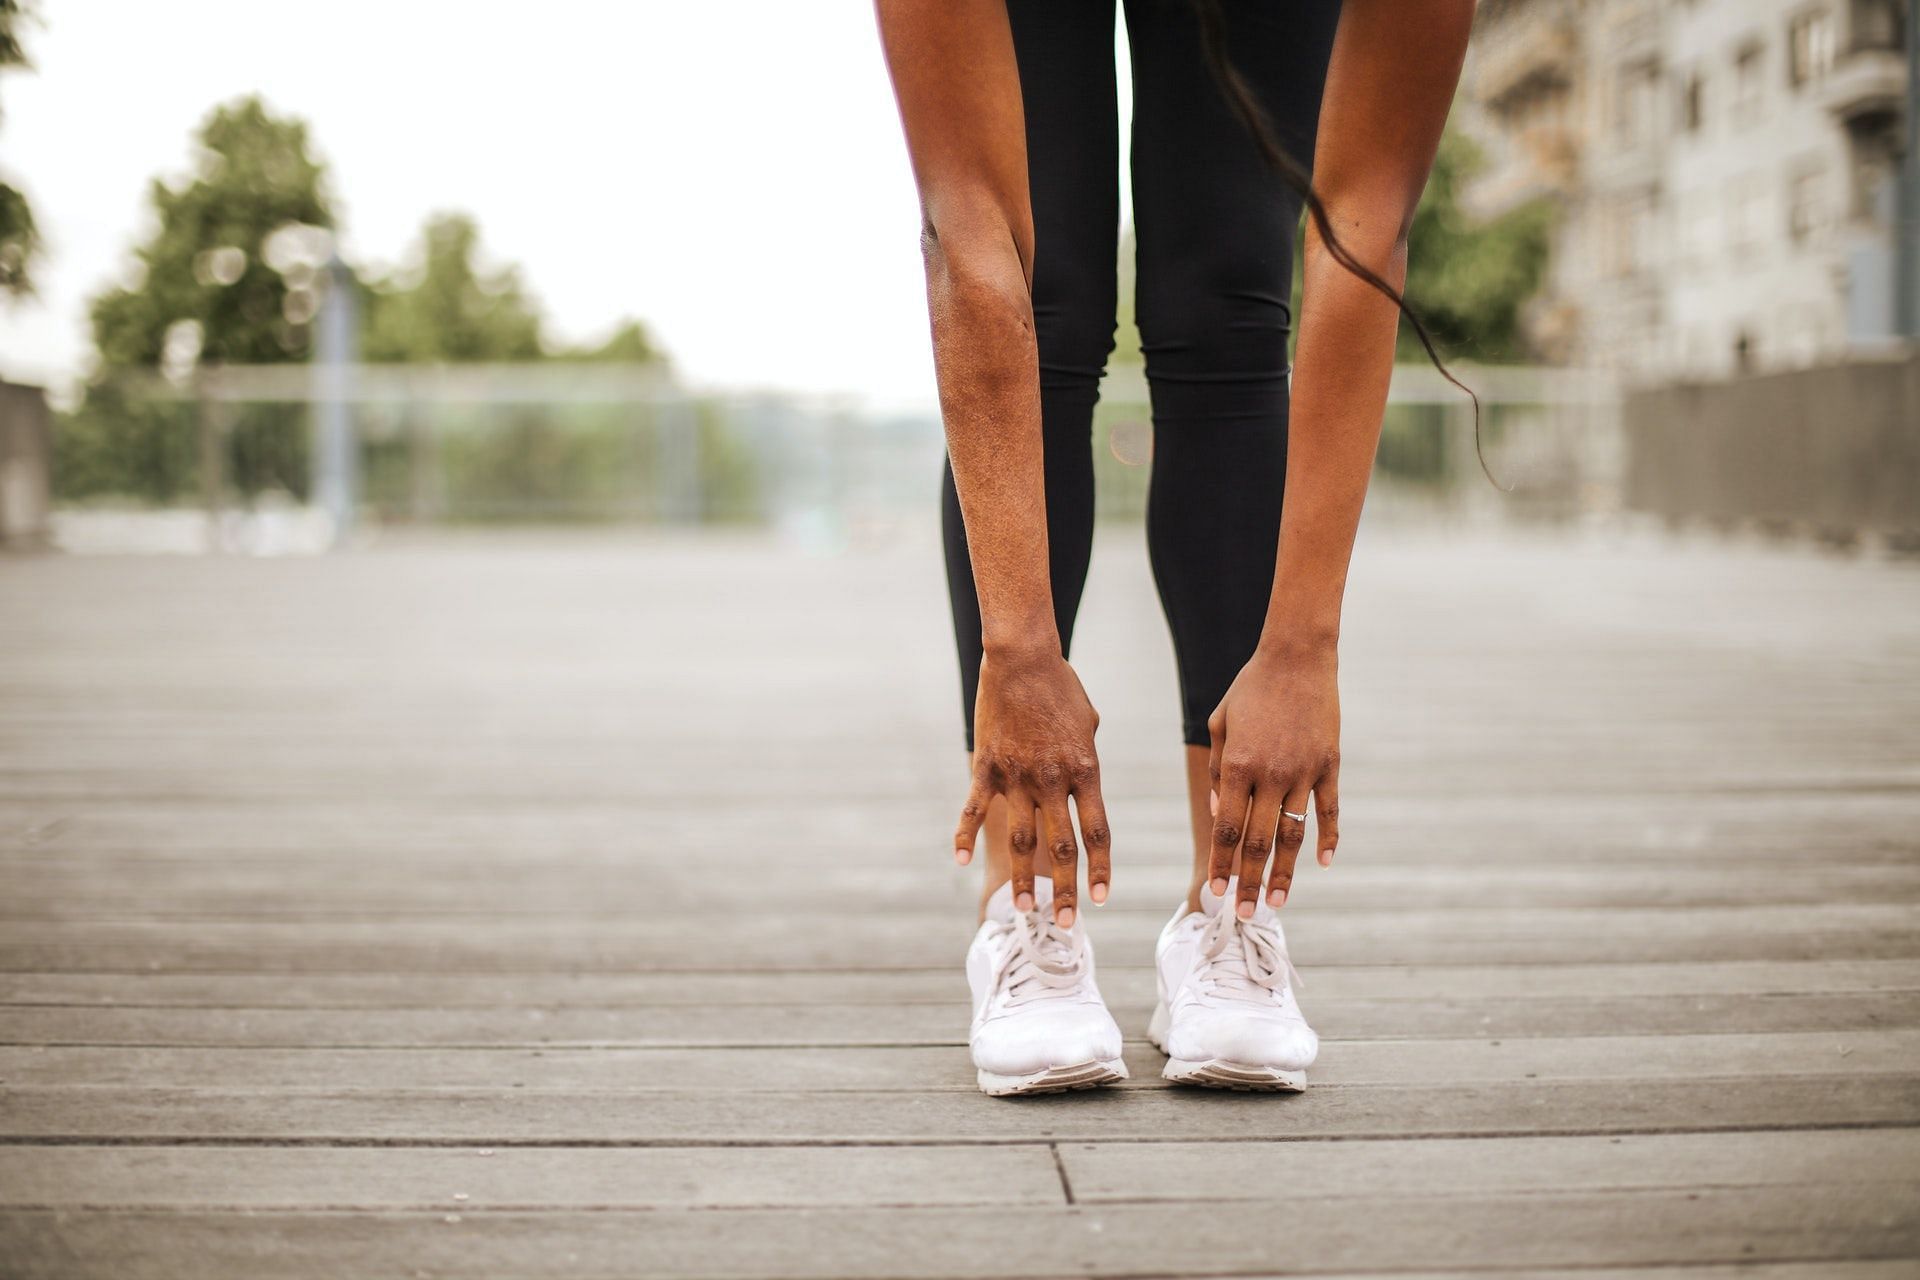 Ankle exercises and stretches can help improve ankle mobility. (Photo by Andrea Piacquadio via pexels)